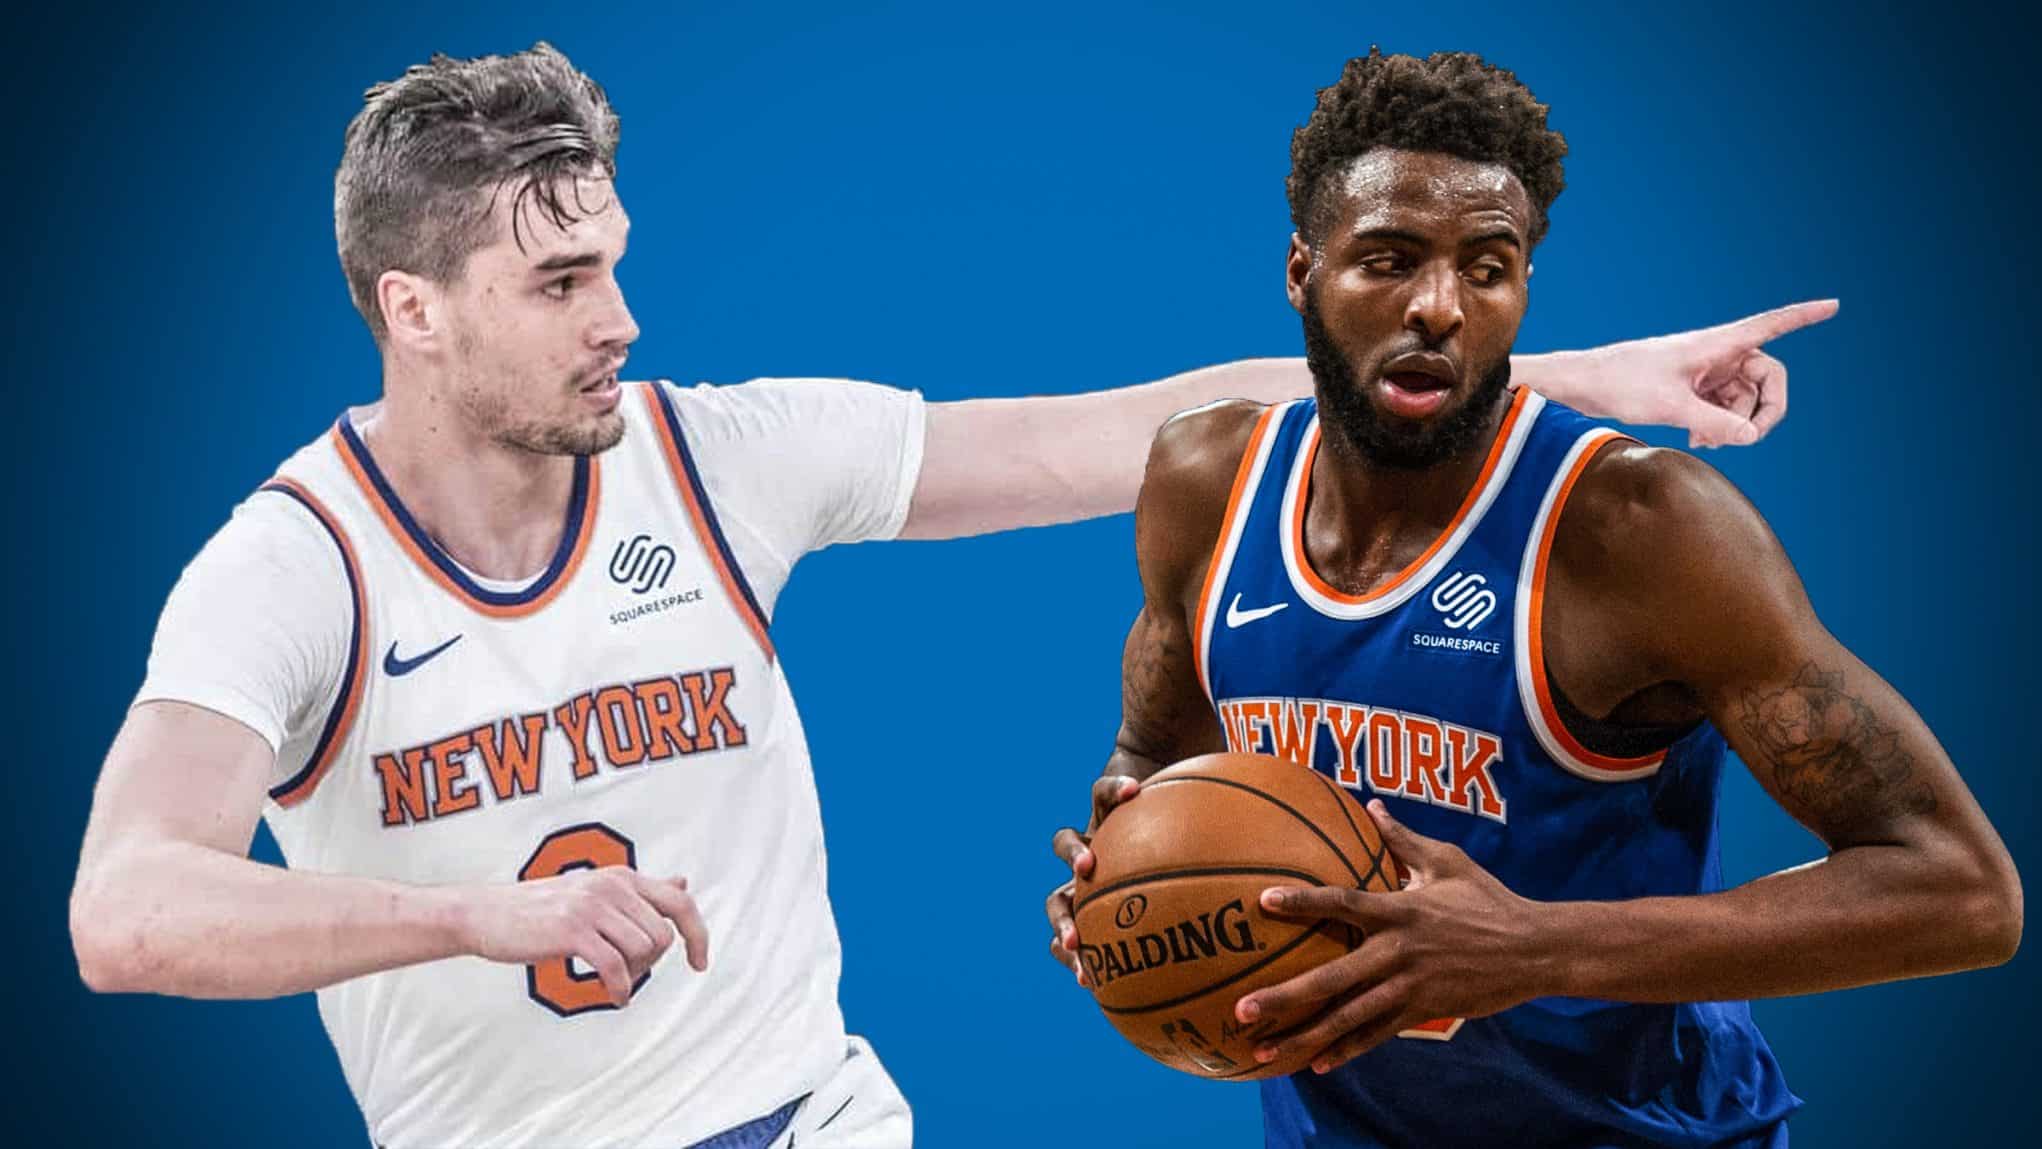 Ranking The New York Knicks By Their Basketball Reference Nicknames